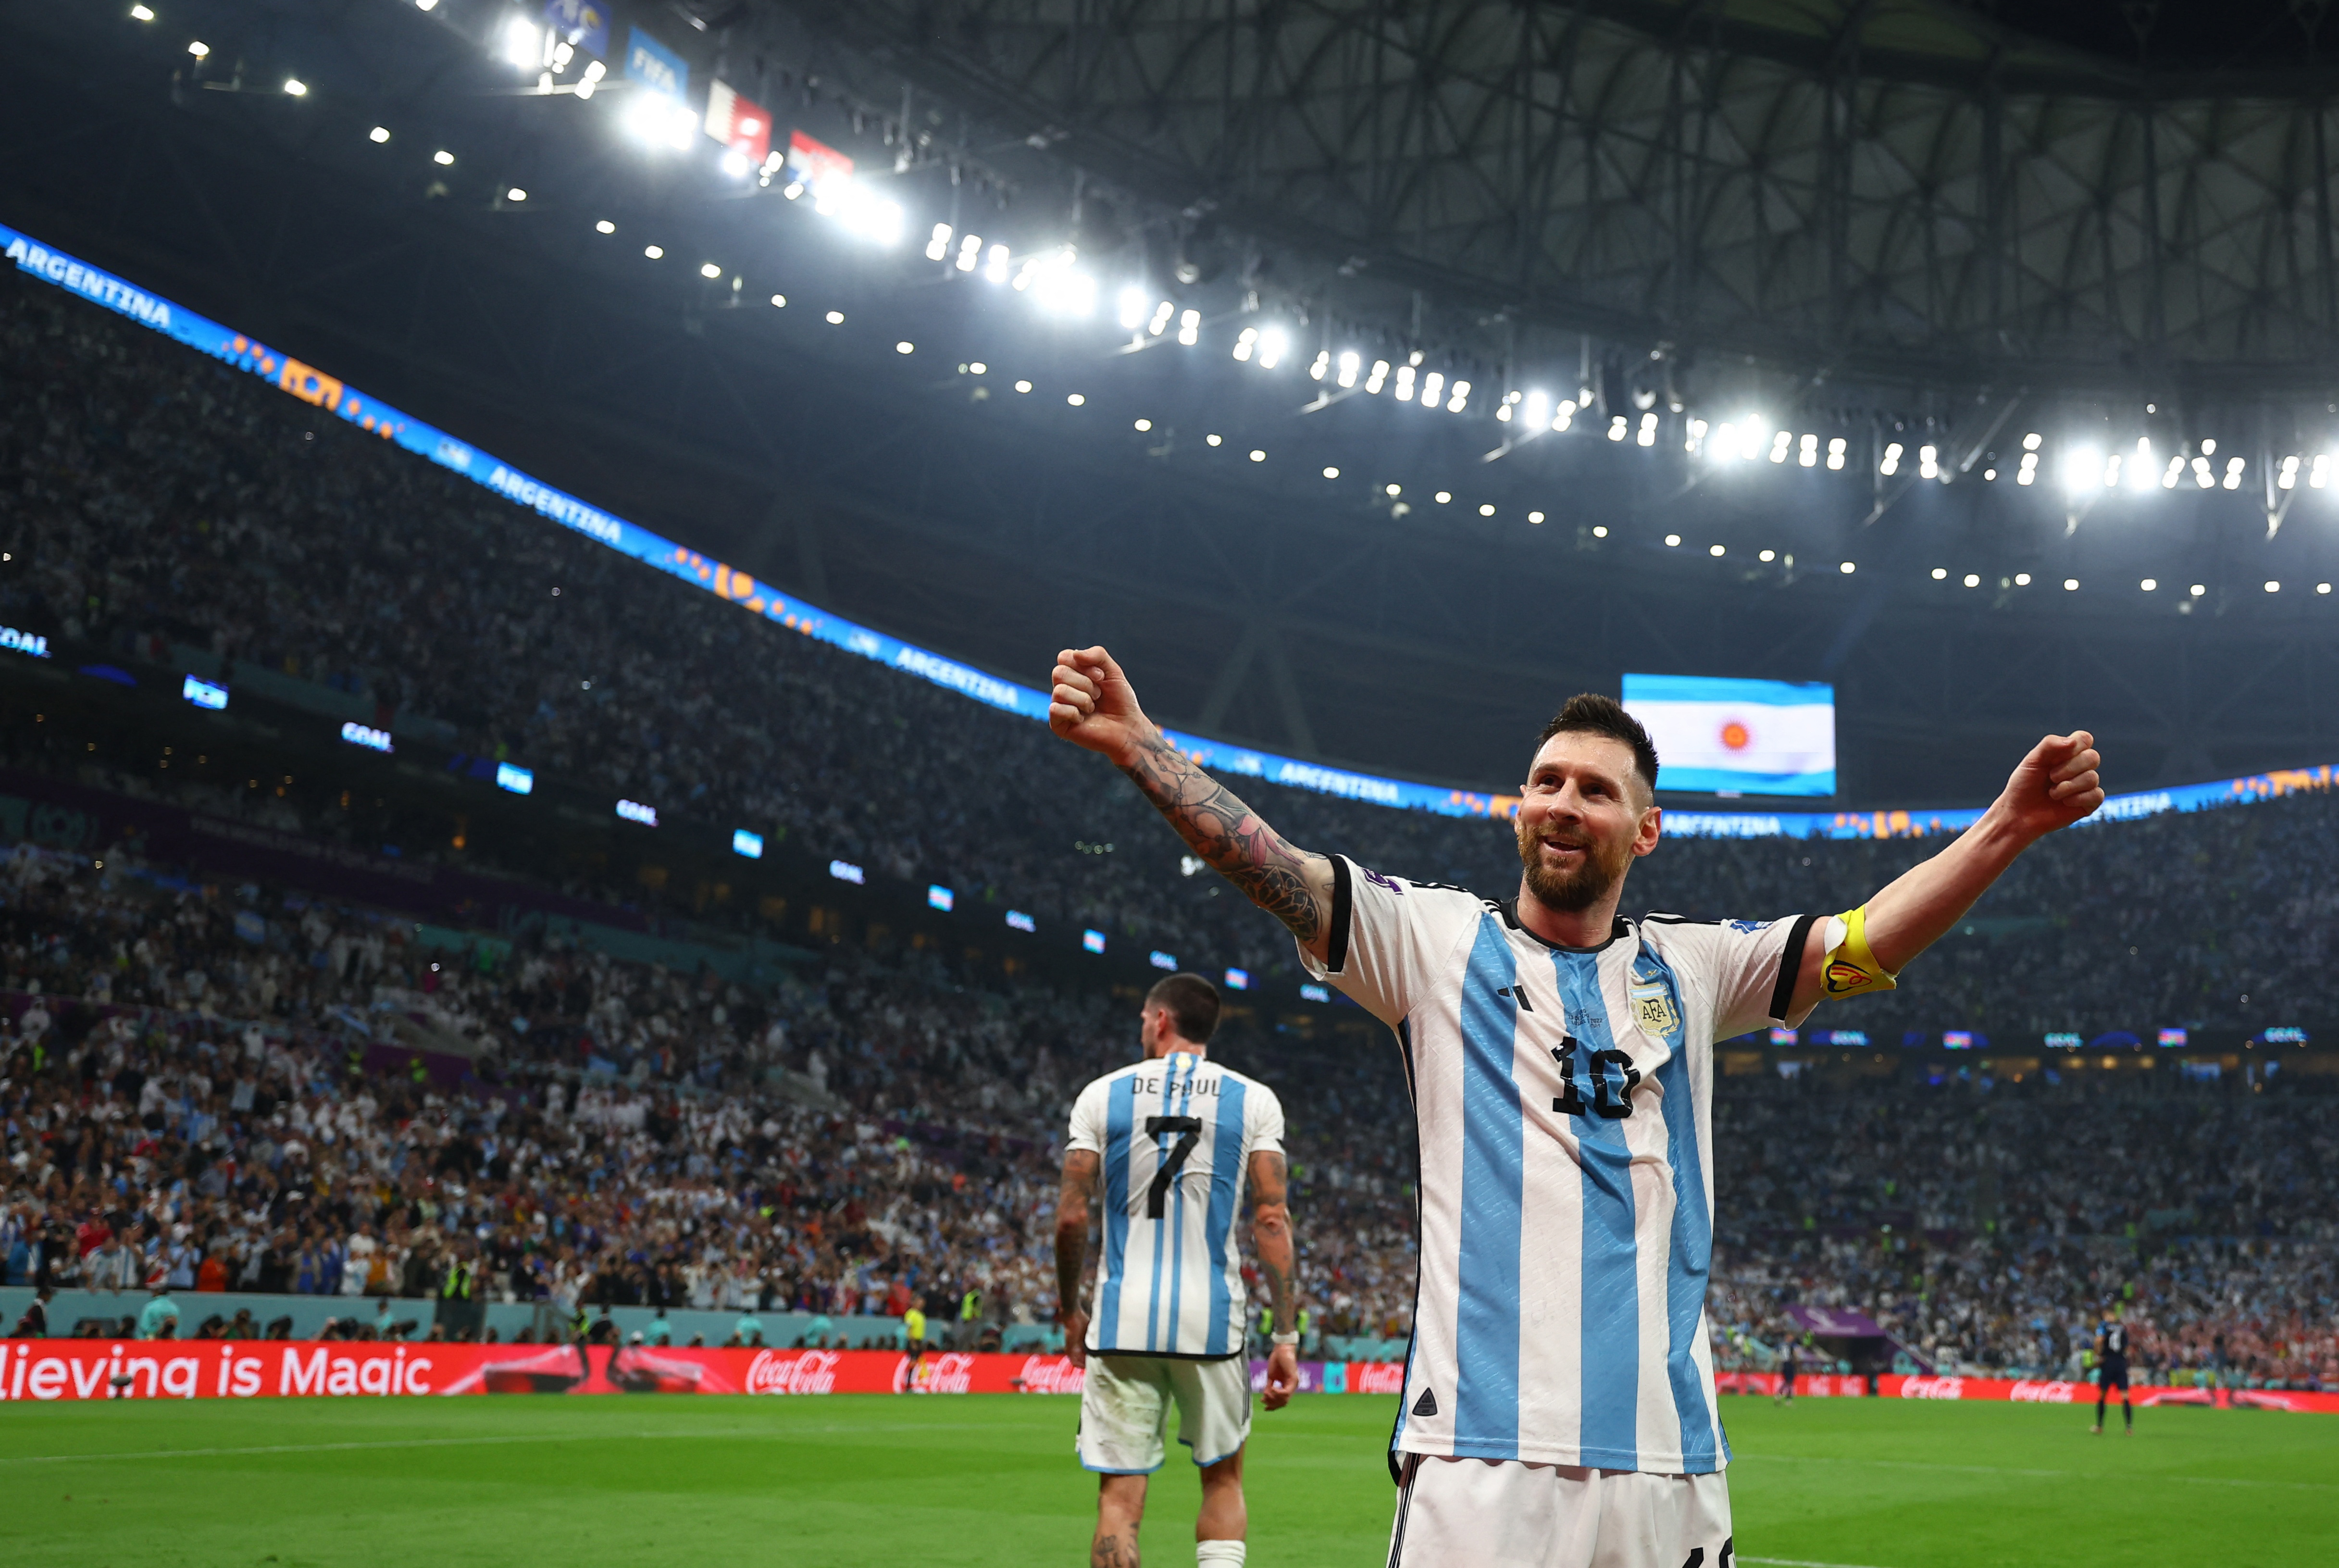 Argentina's Lionel Messi: World Cup goals, stats and career highlights